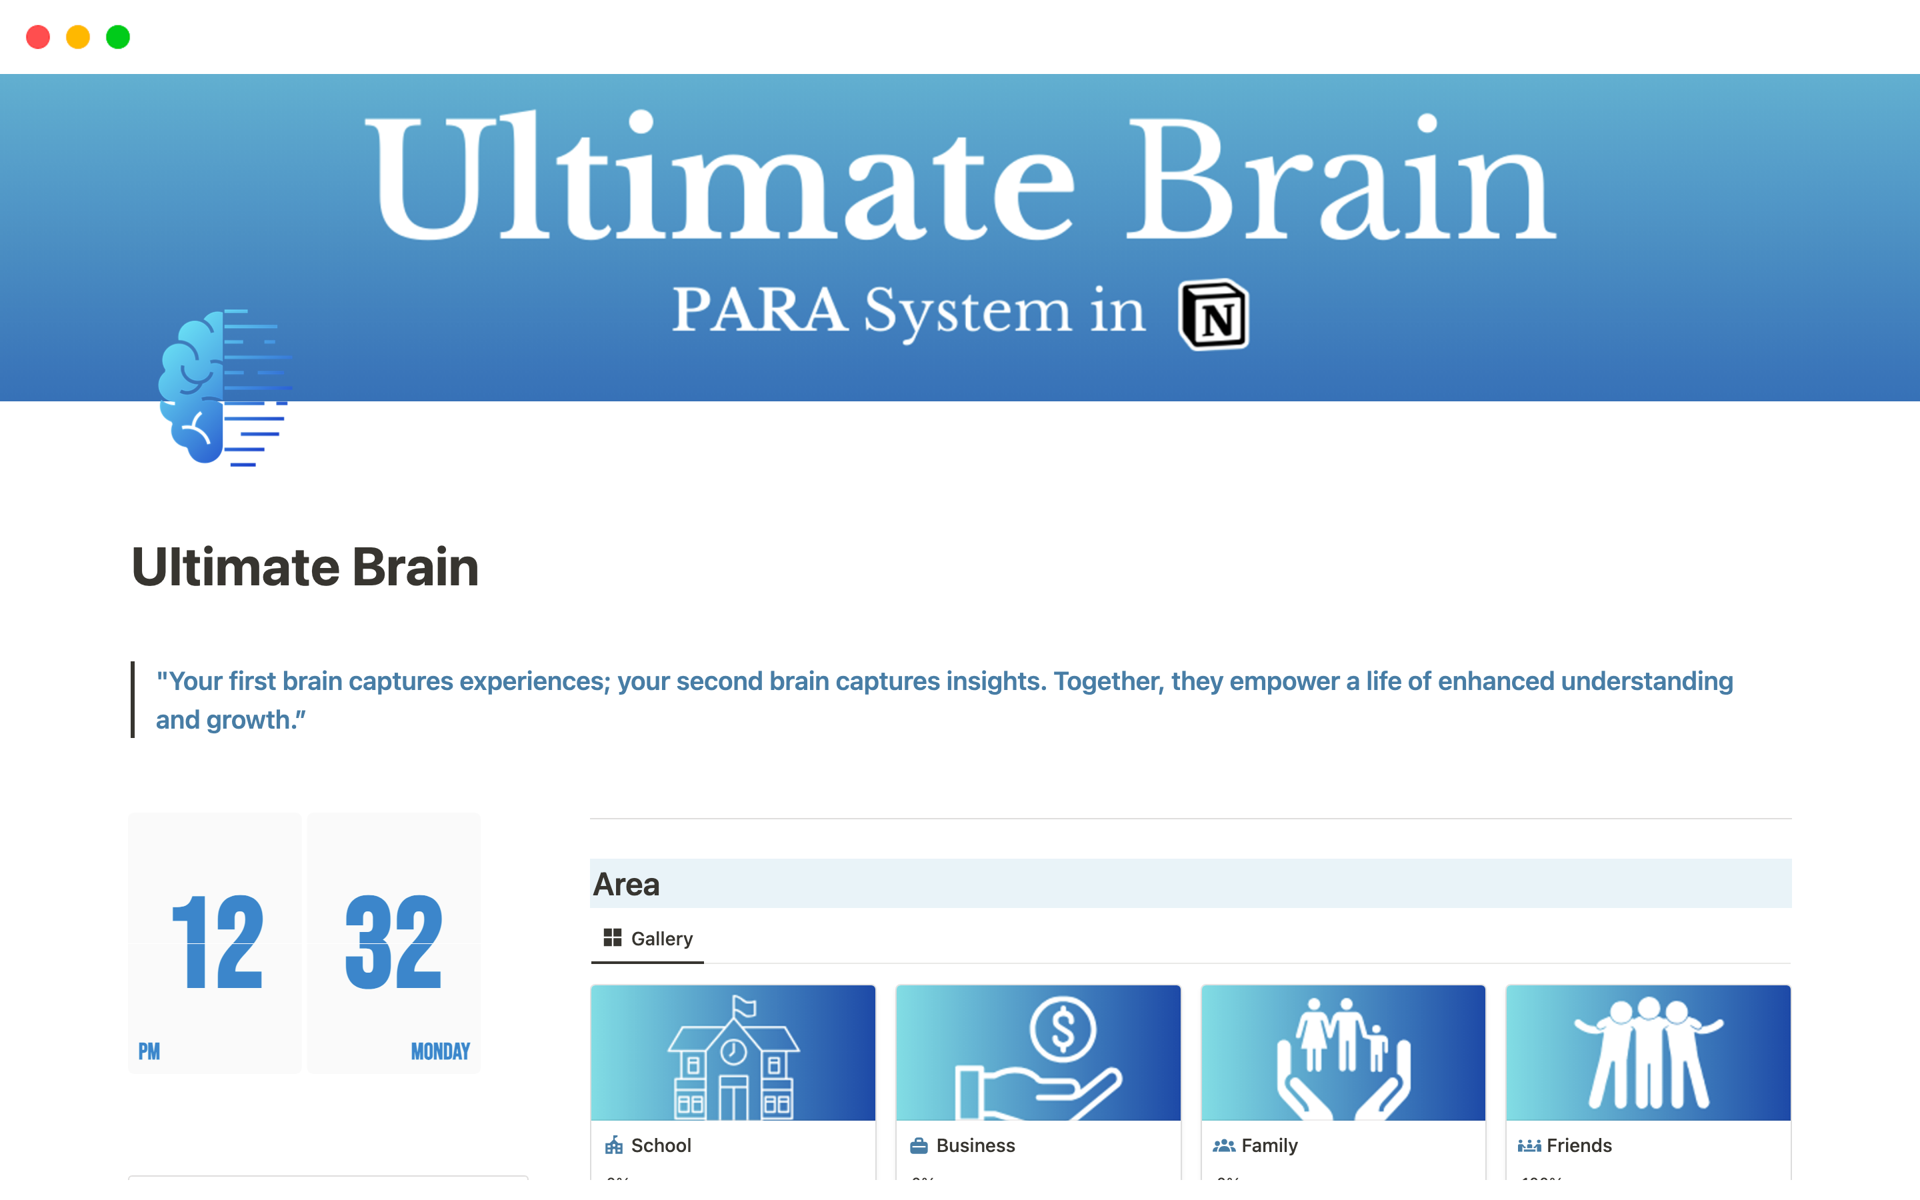 PARA (SECOND BRAIN) Notion Template

Organize Your Life with the Power of PARA & The Principles of a Second Brain!

